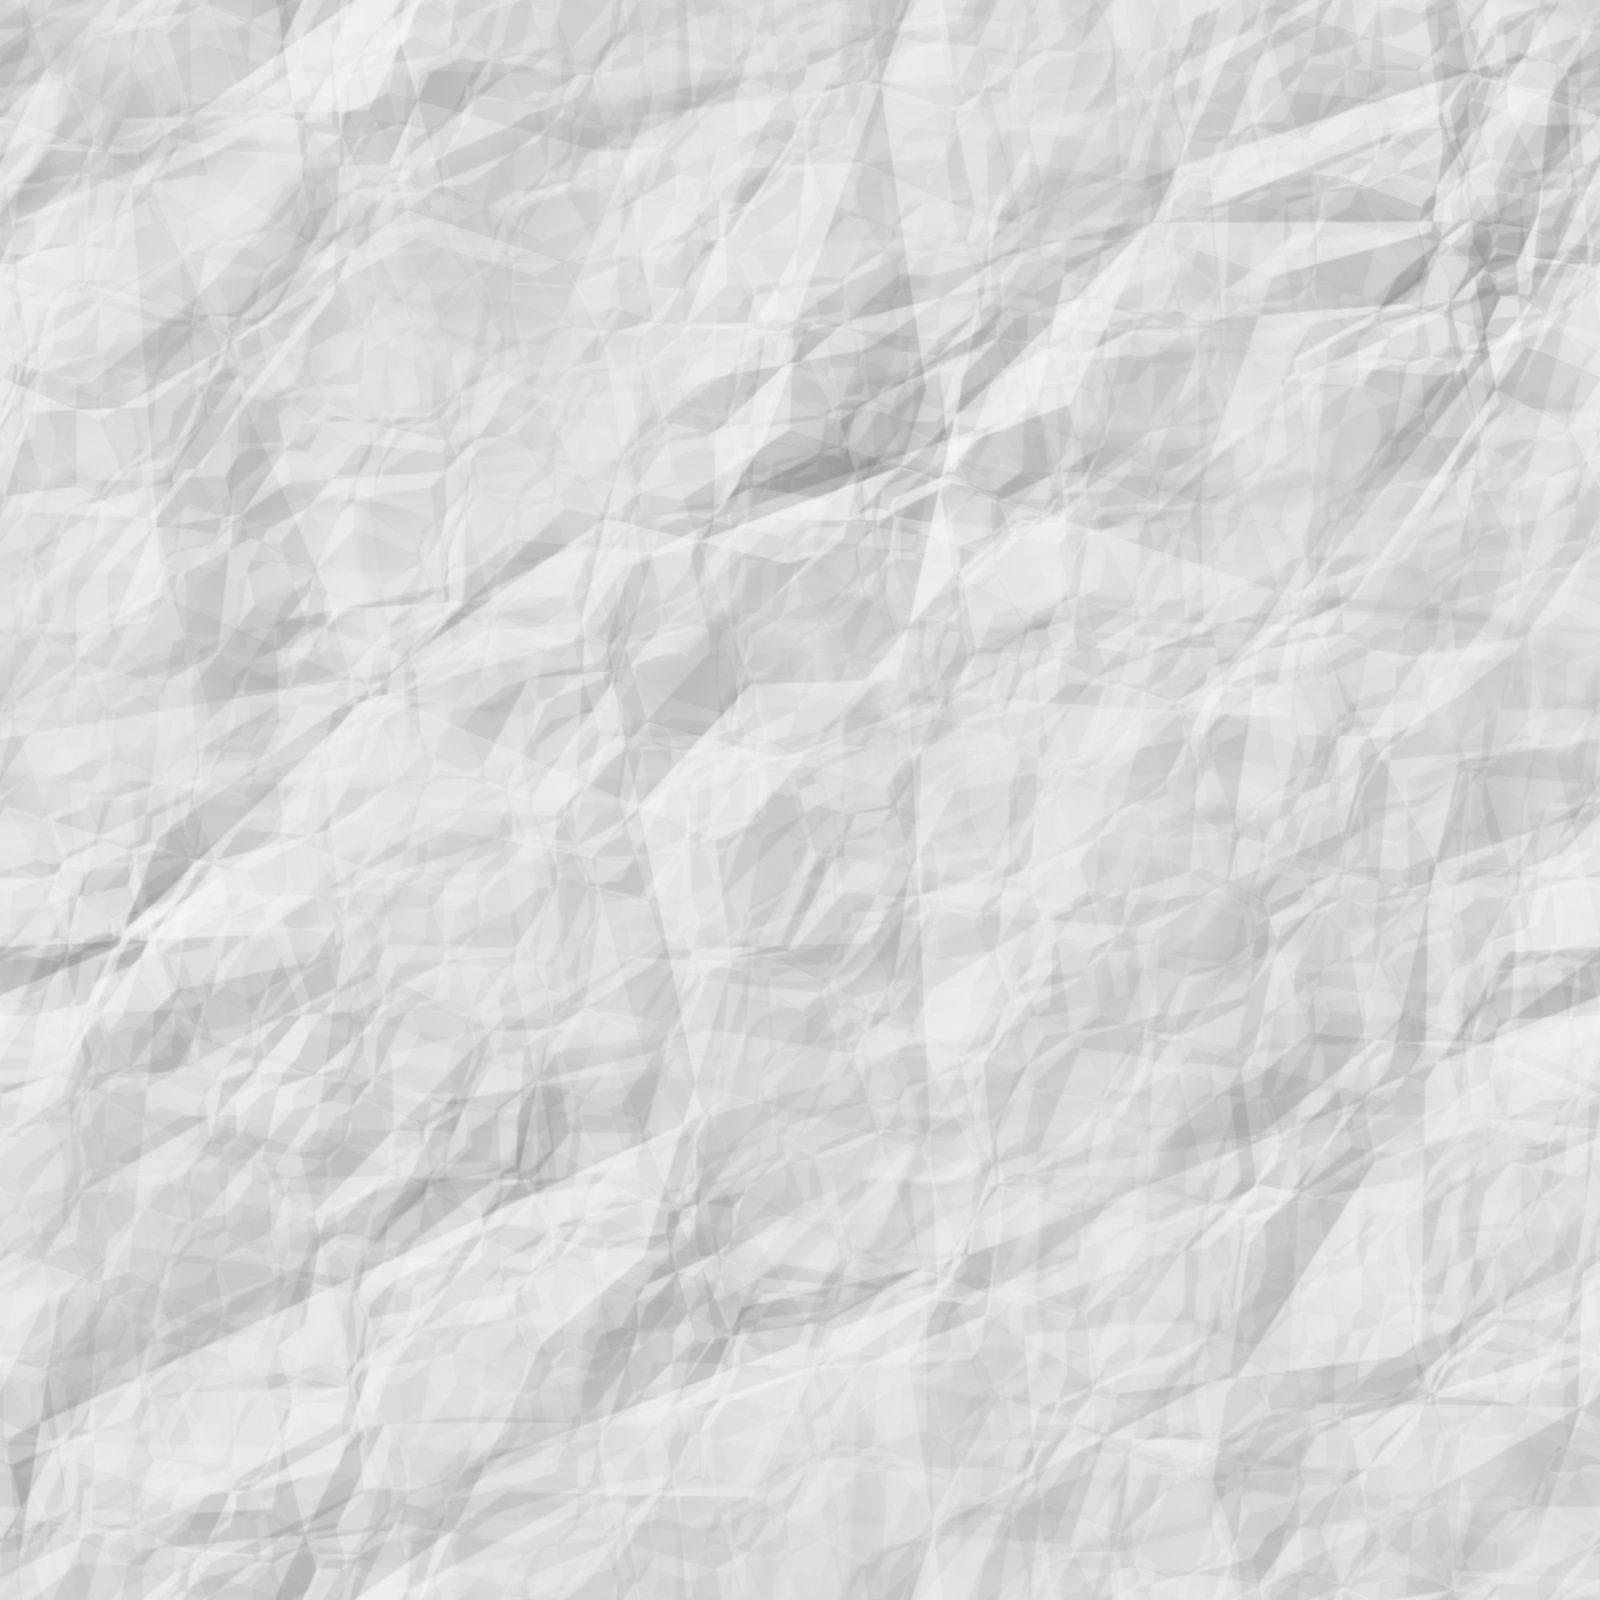 Seamless, Texture, Background, Crumpled Paper